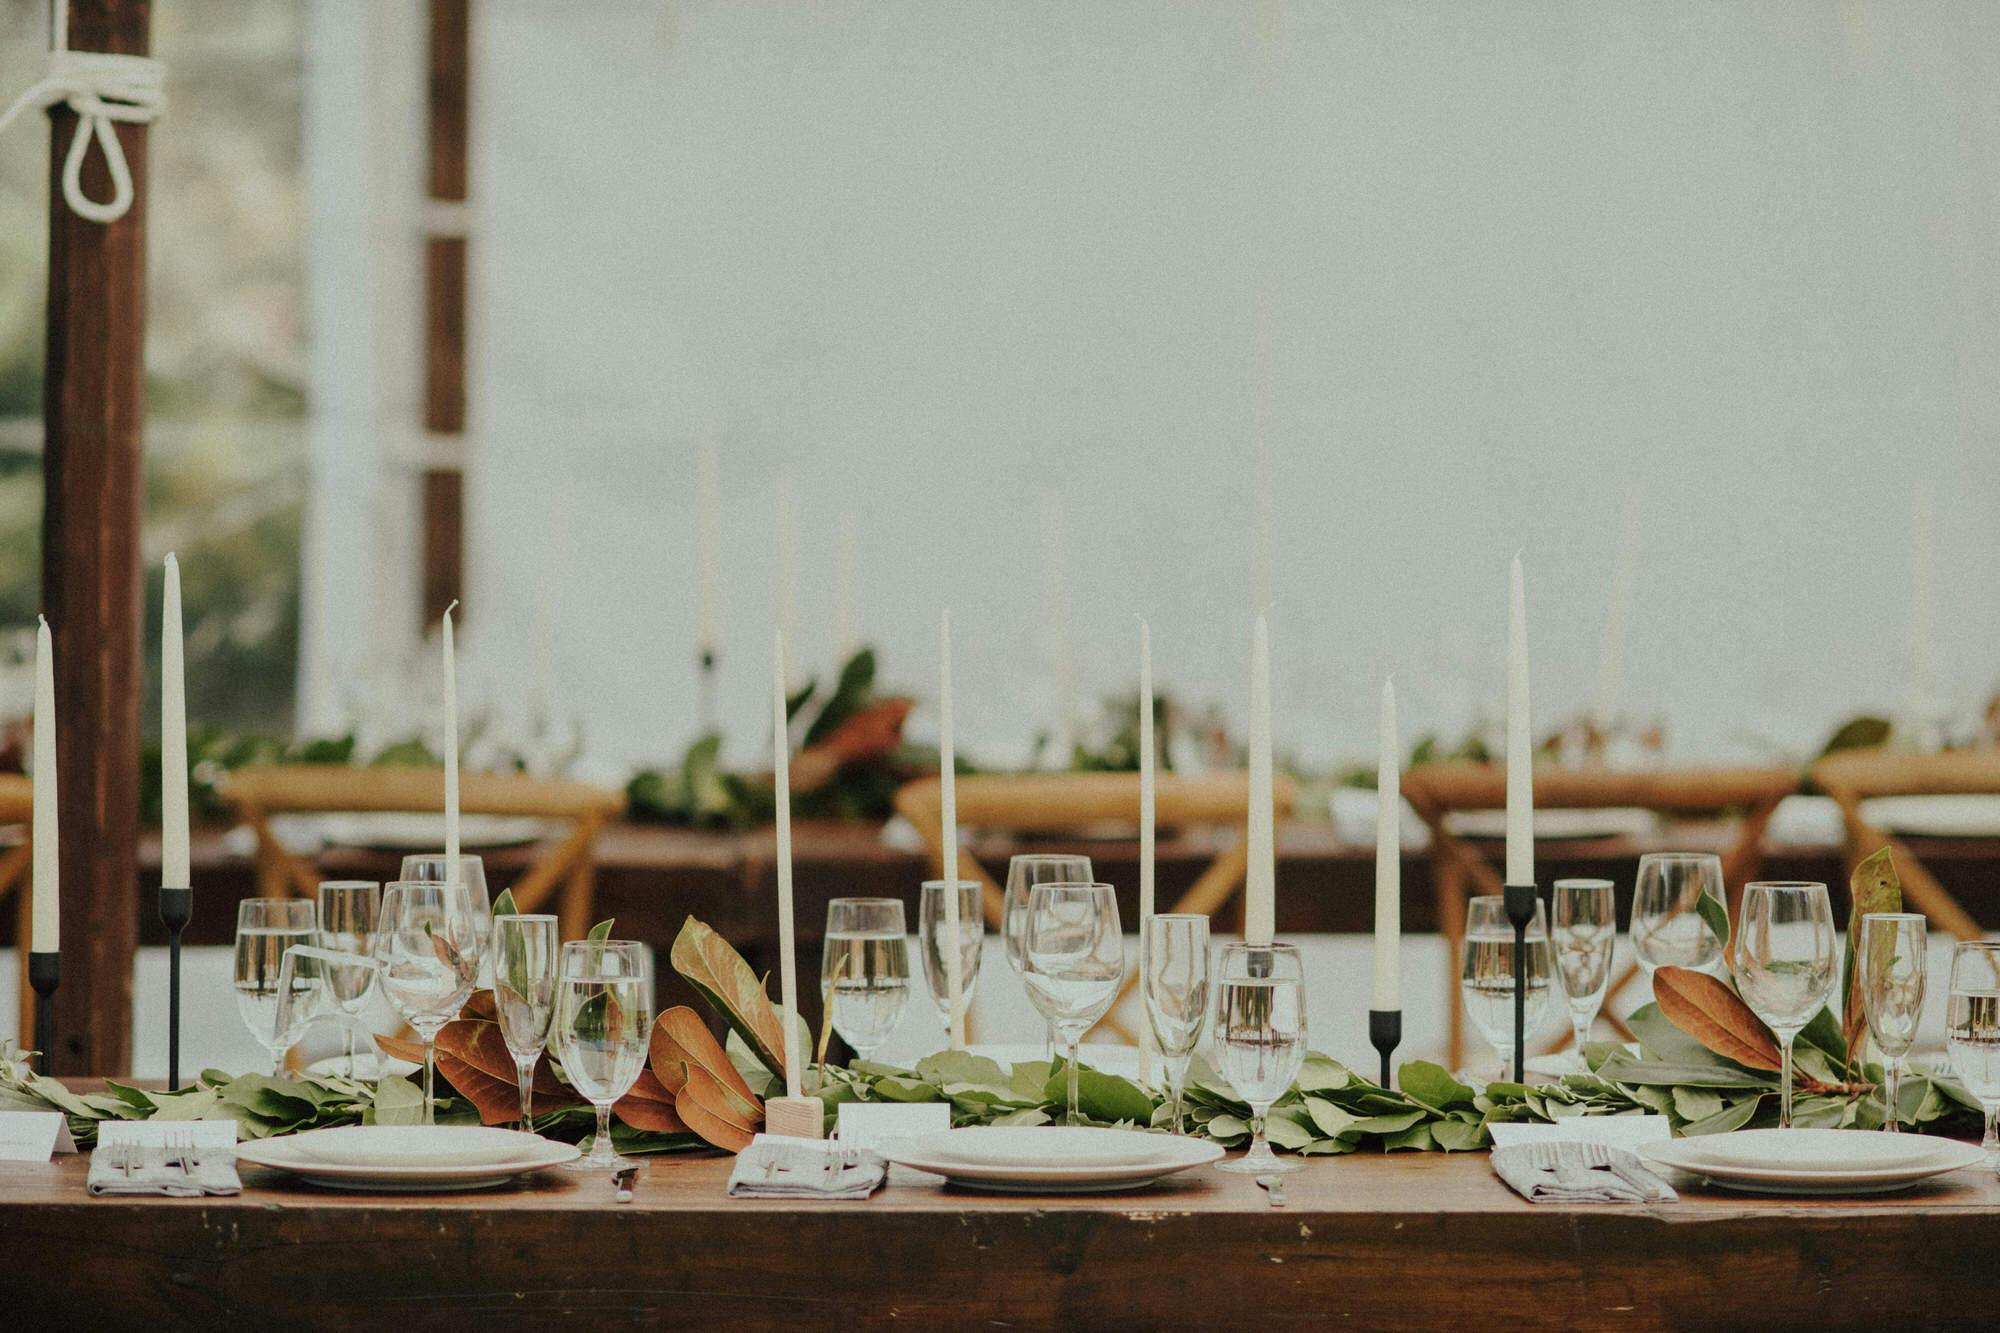 details of candles and florals on tabletop